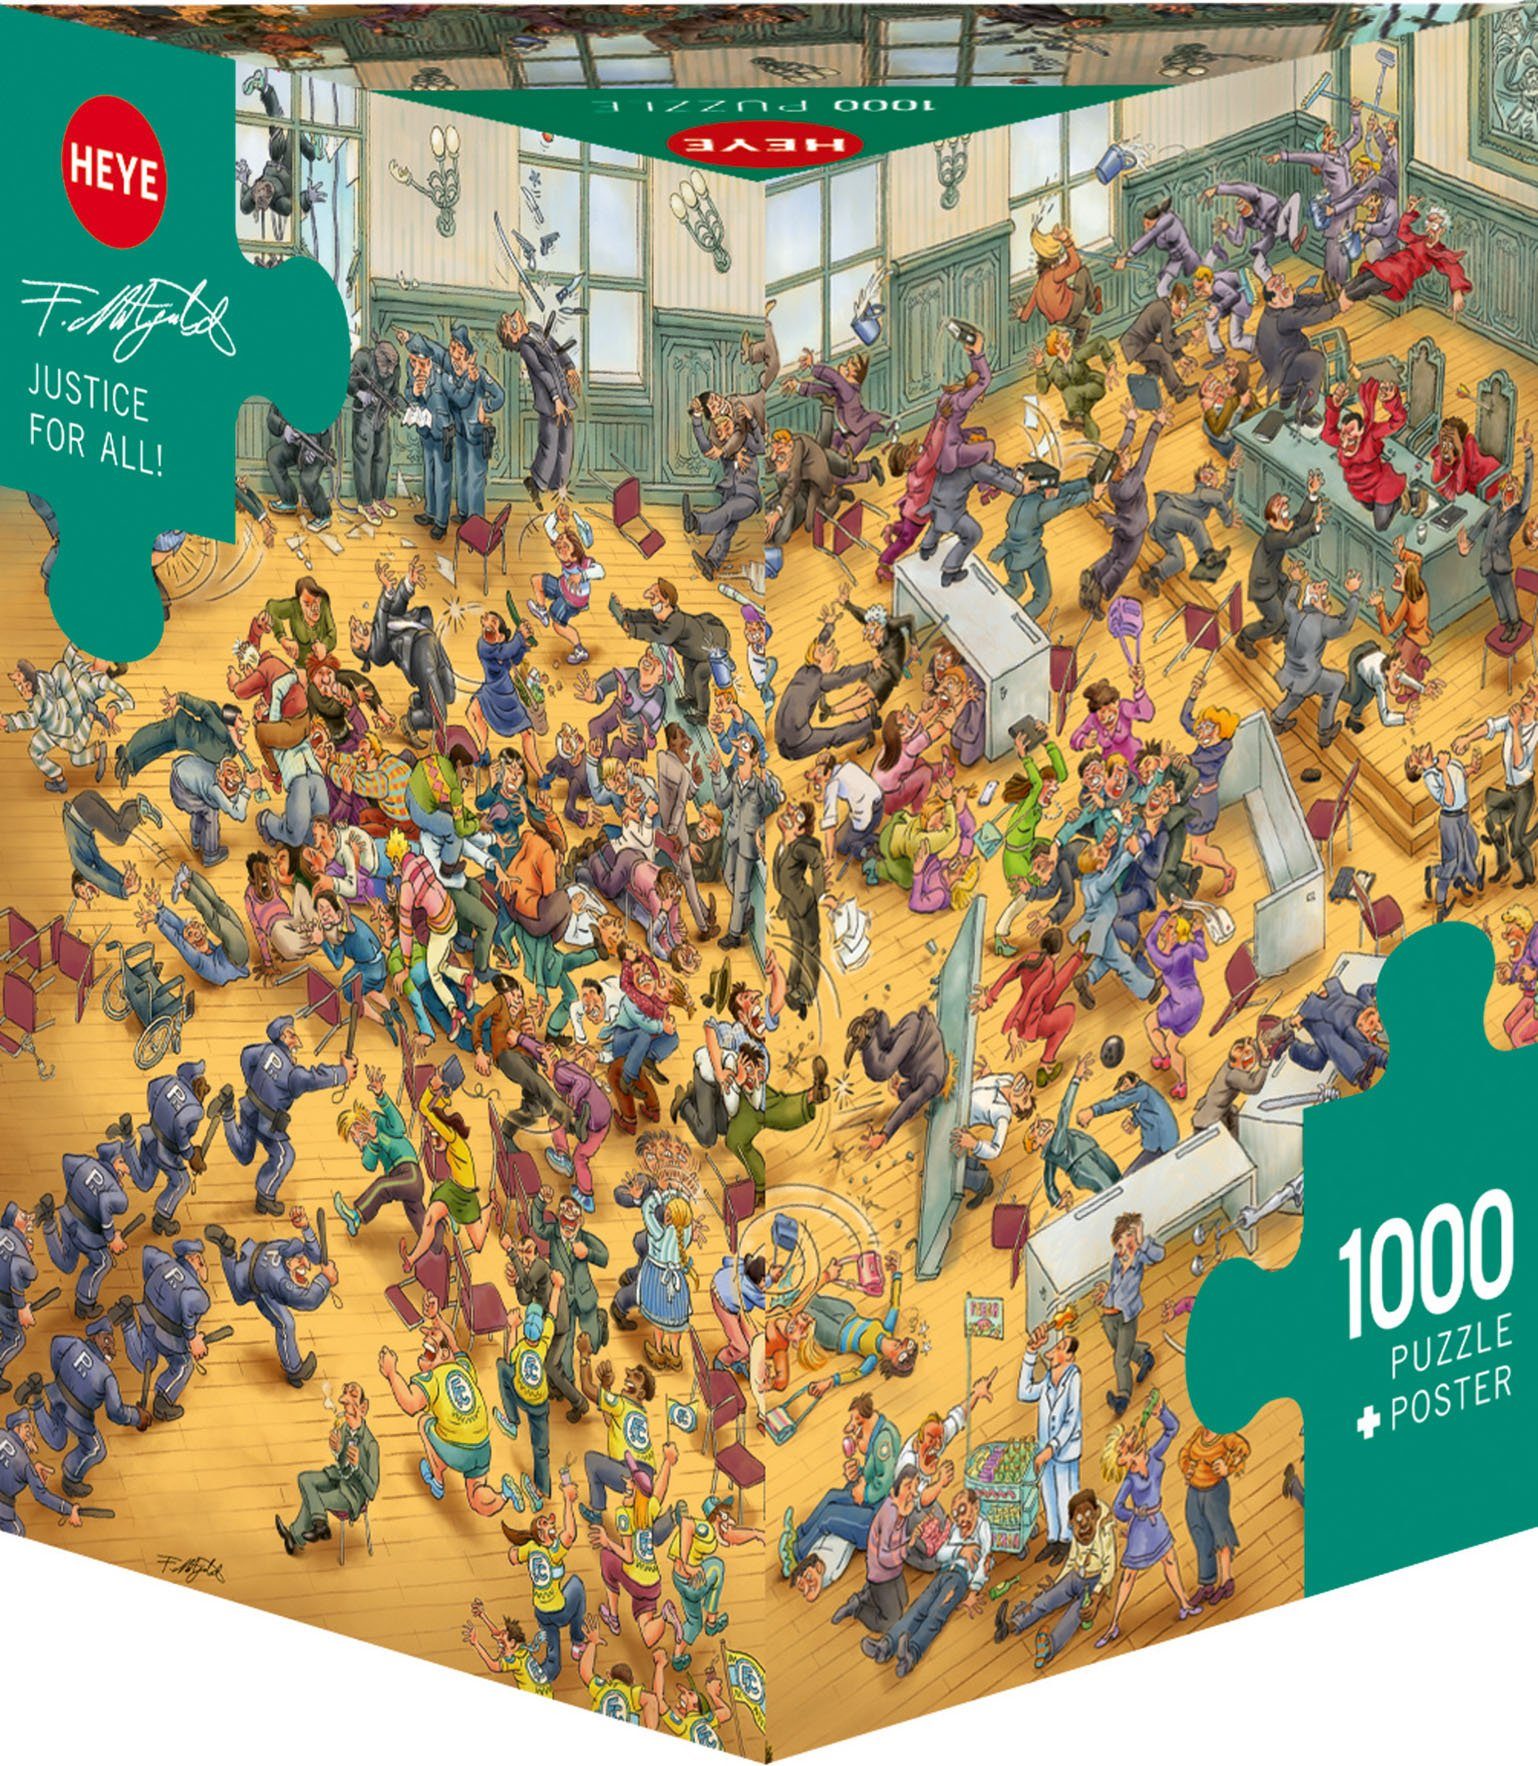 HEYE Puzzle Justice For All! in Made Mitgutsch, Puzzleteile, 1000 Europe